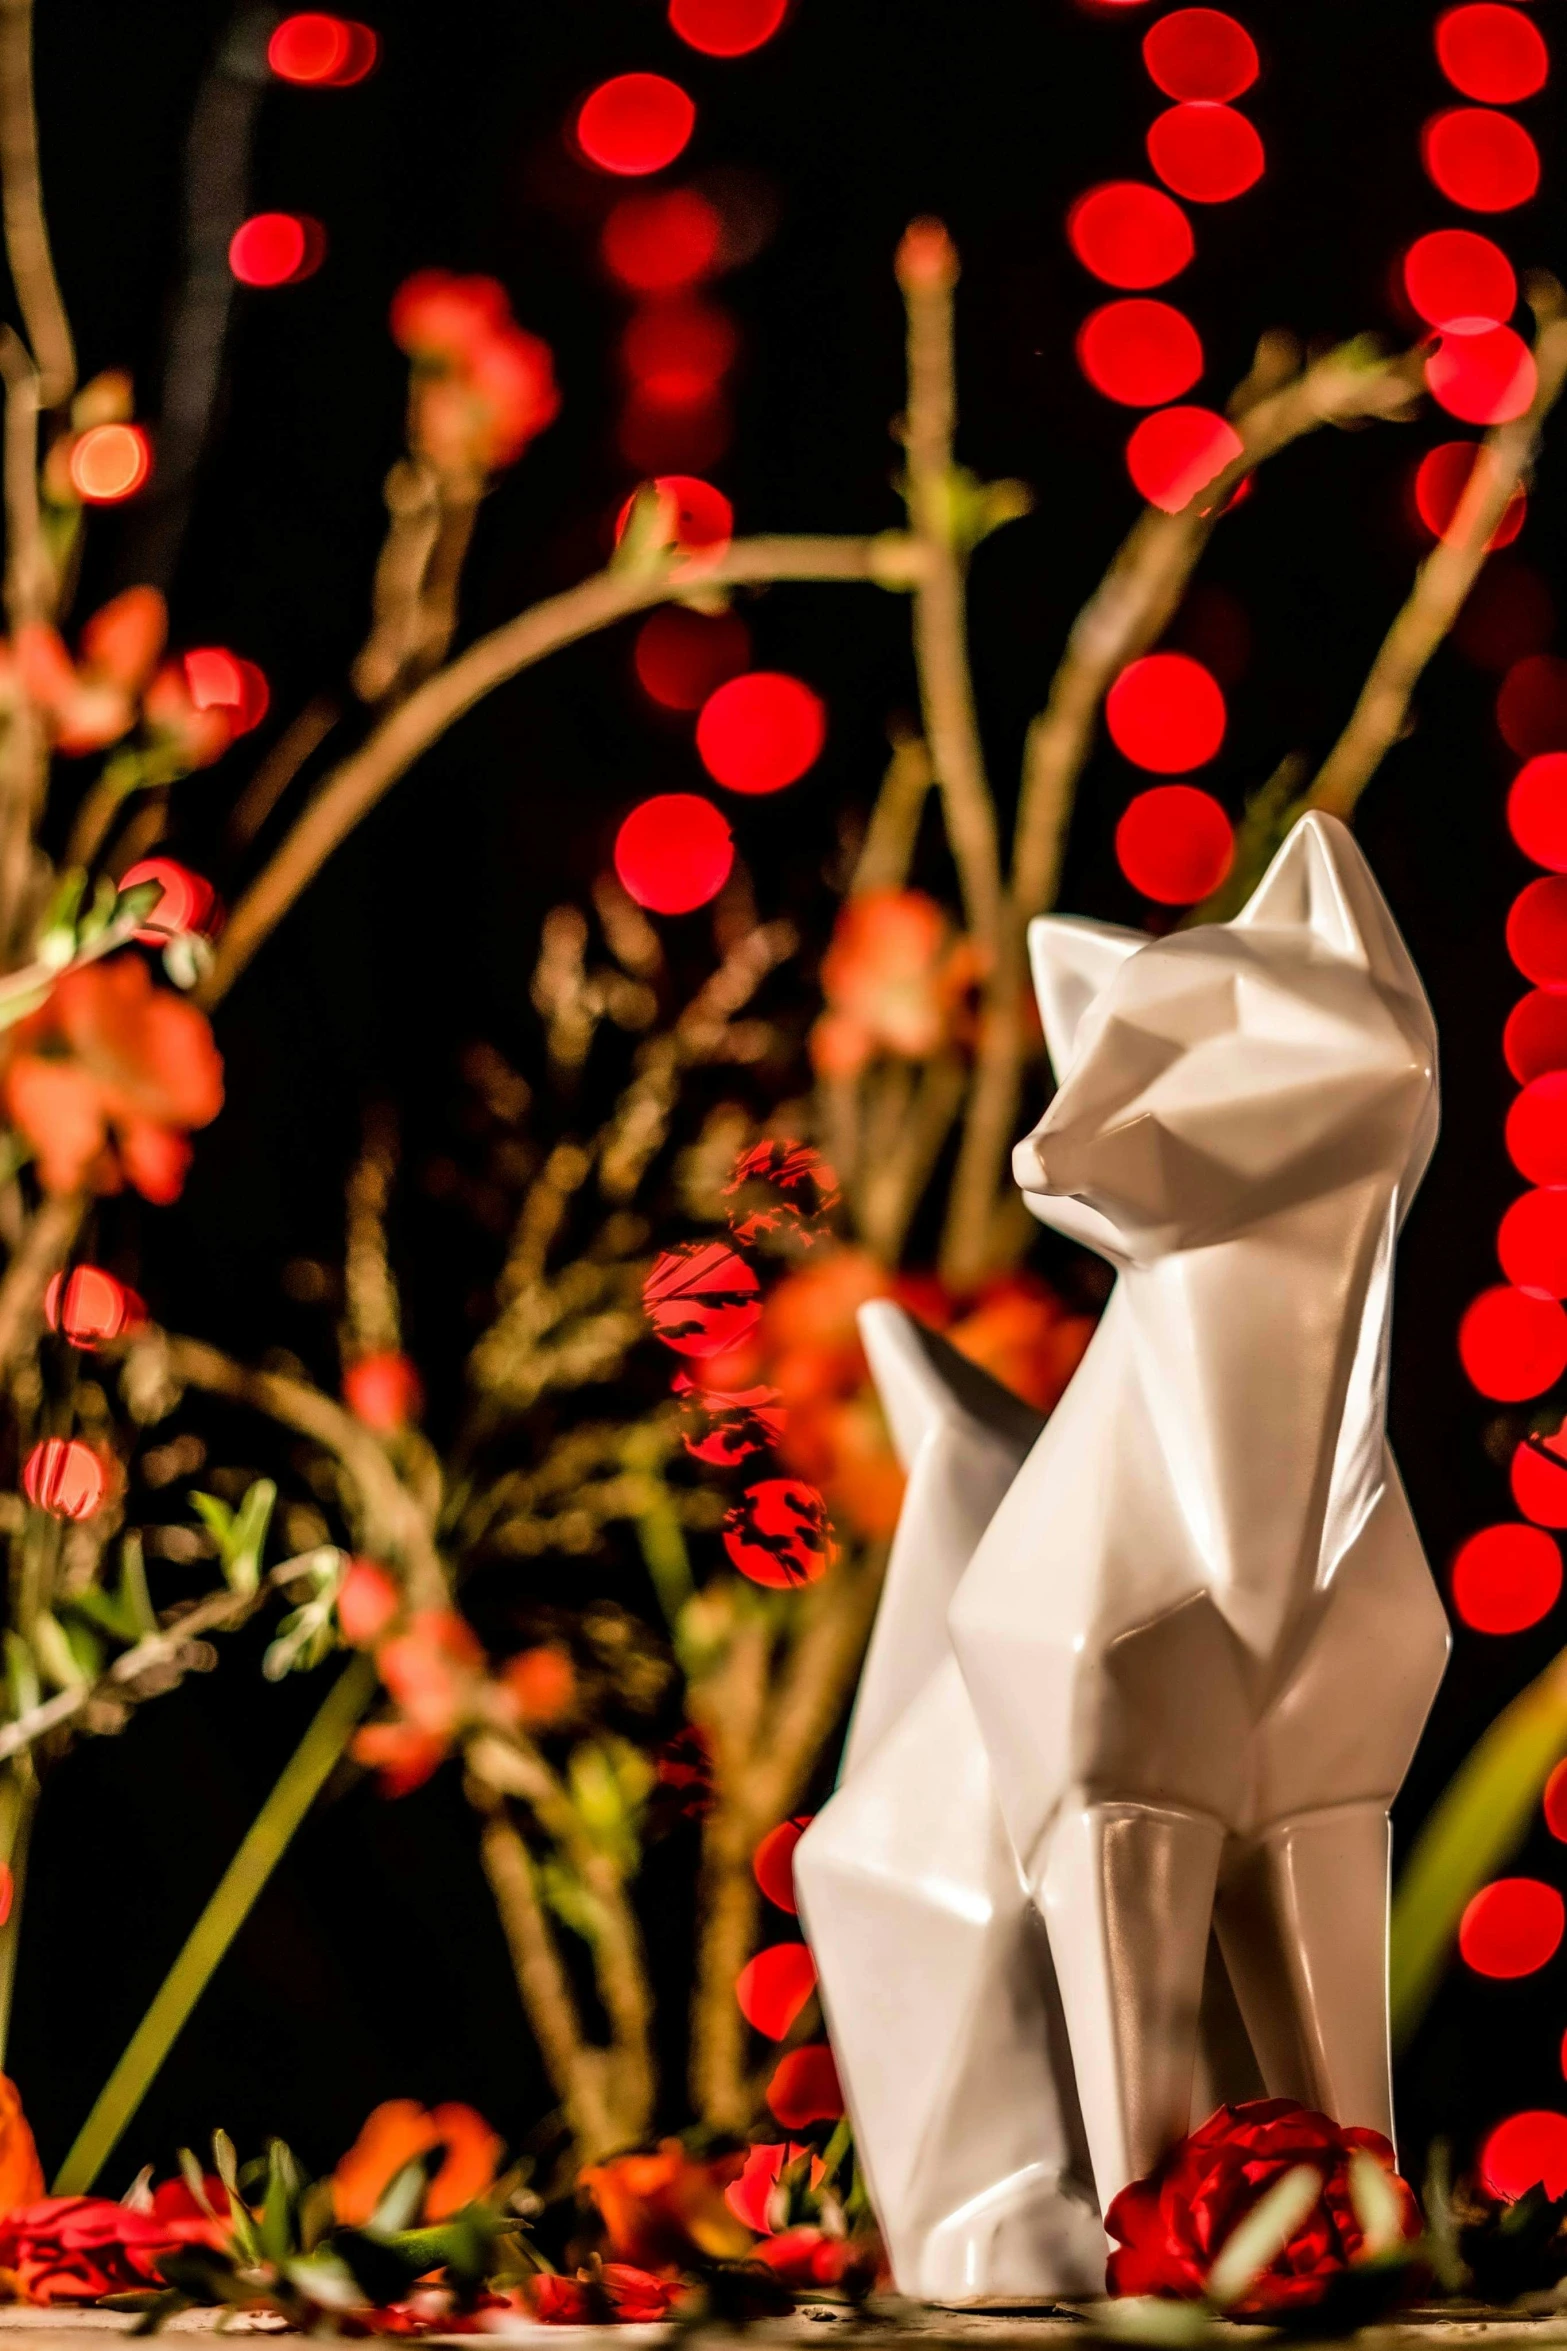 a white origami animal sits amongst flowers and blurry lights